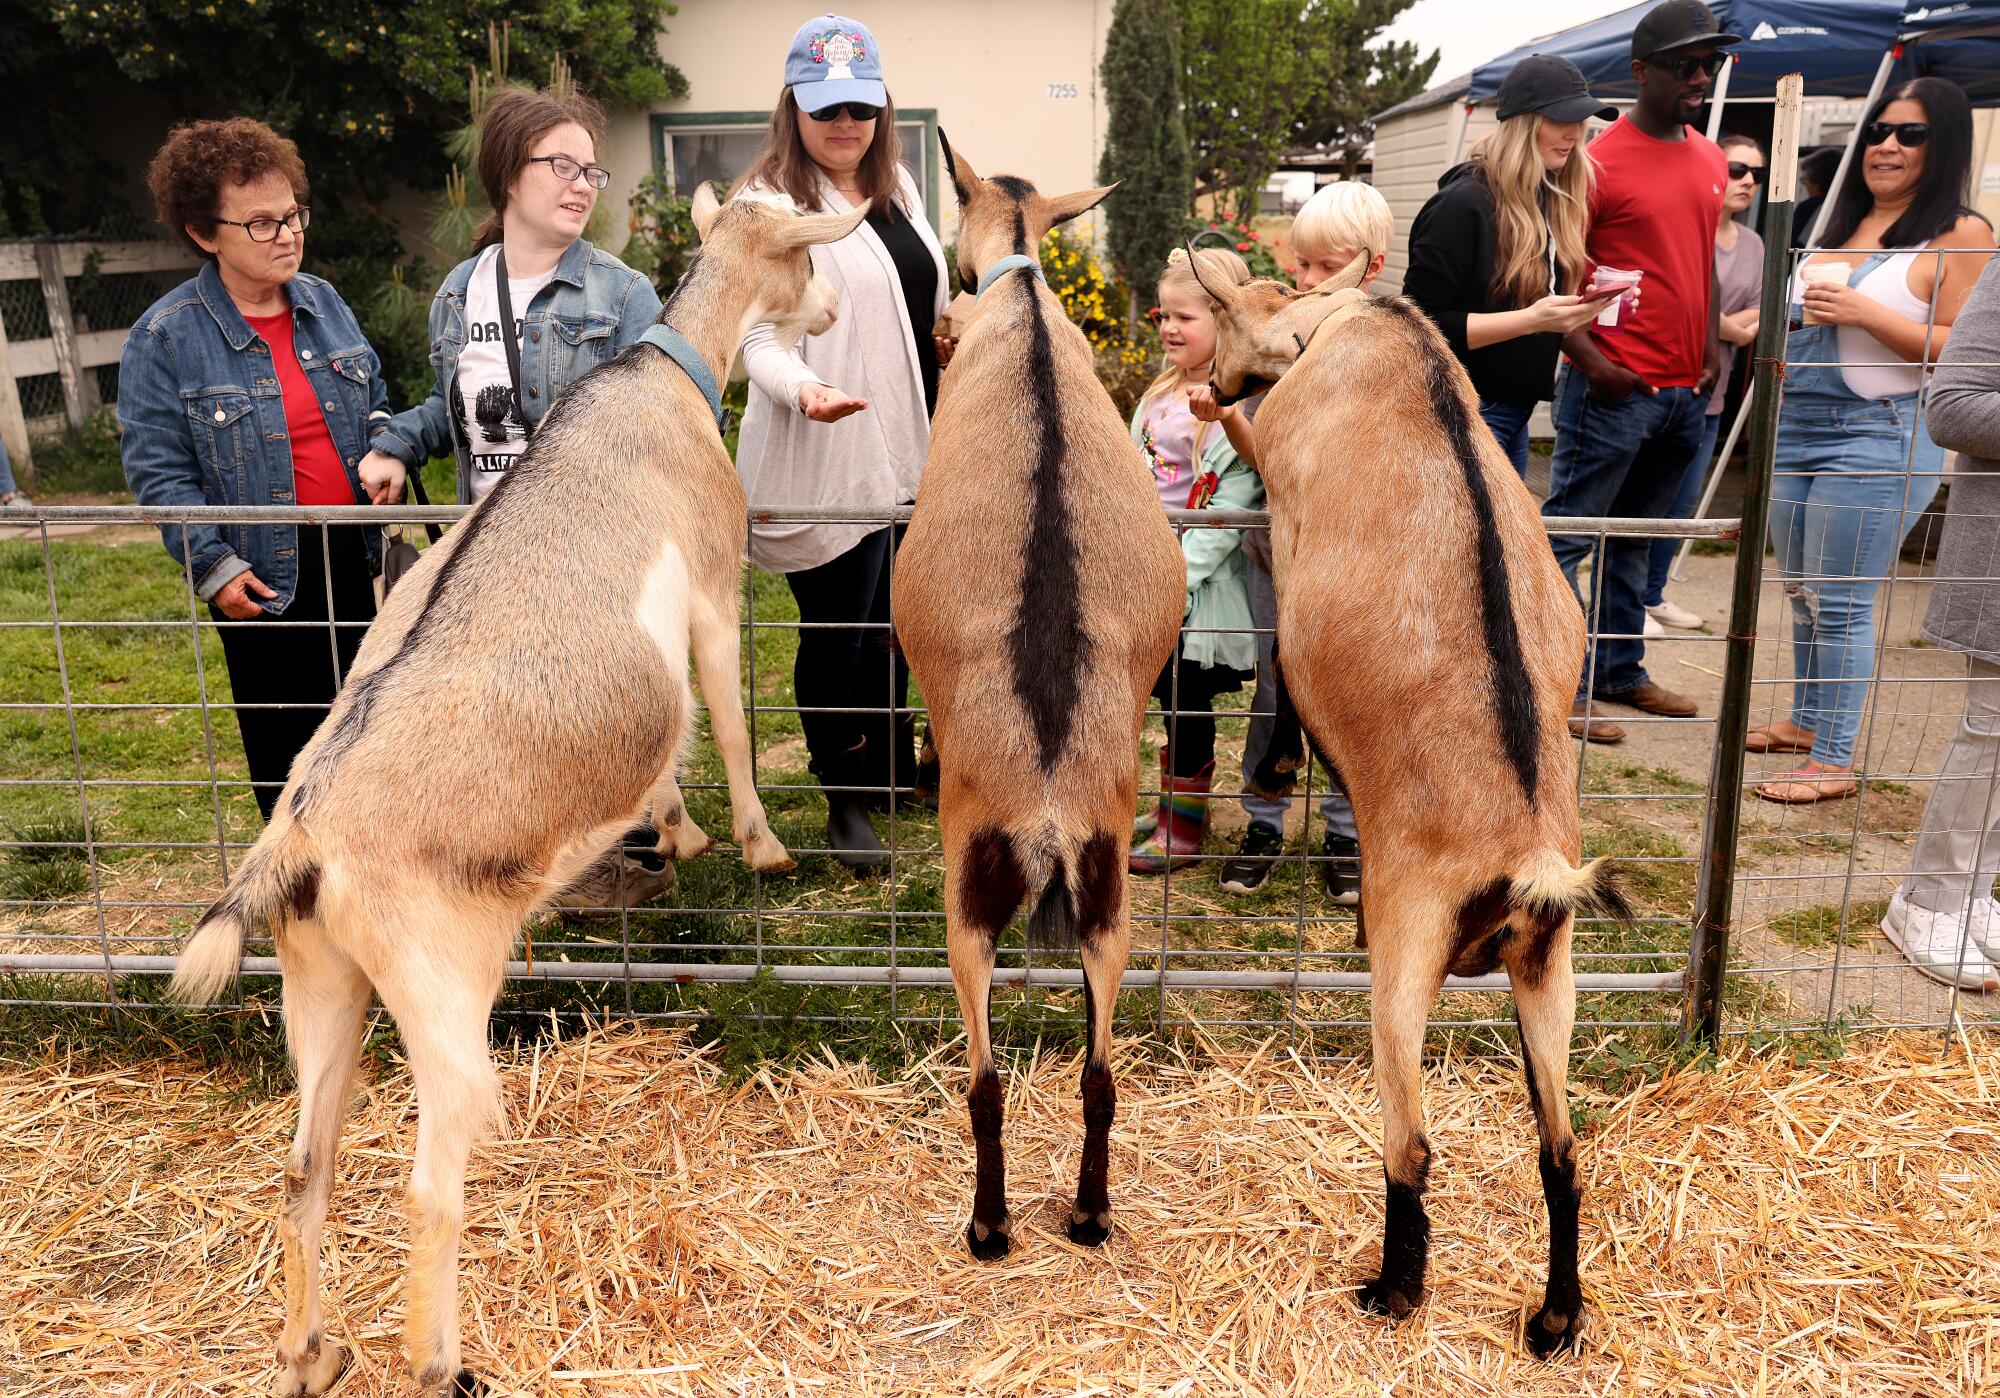  Three goats stand on their hind legs to receive treats from farm visitors.